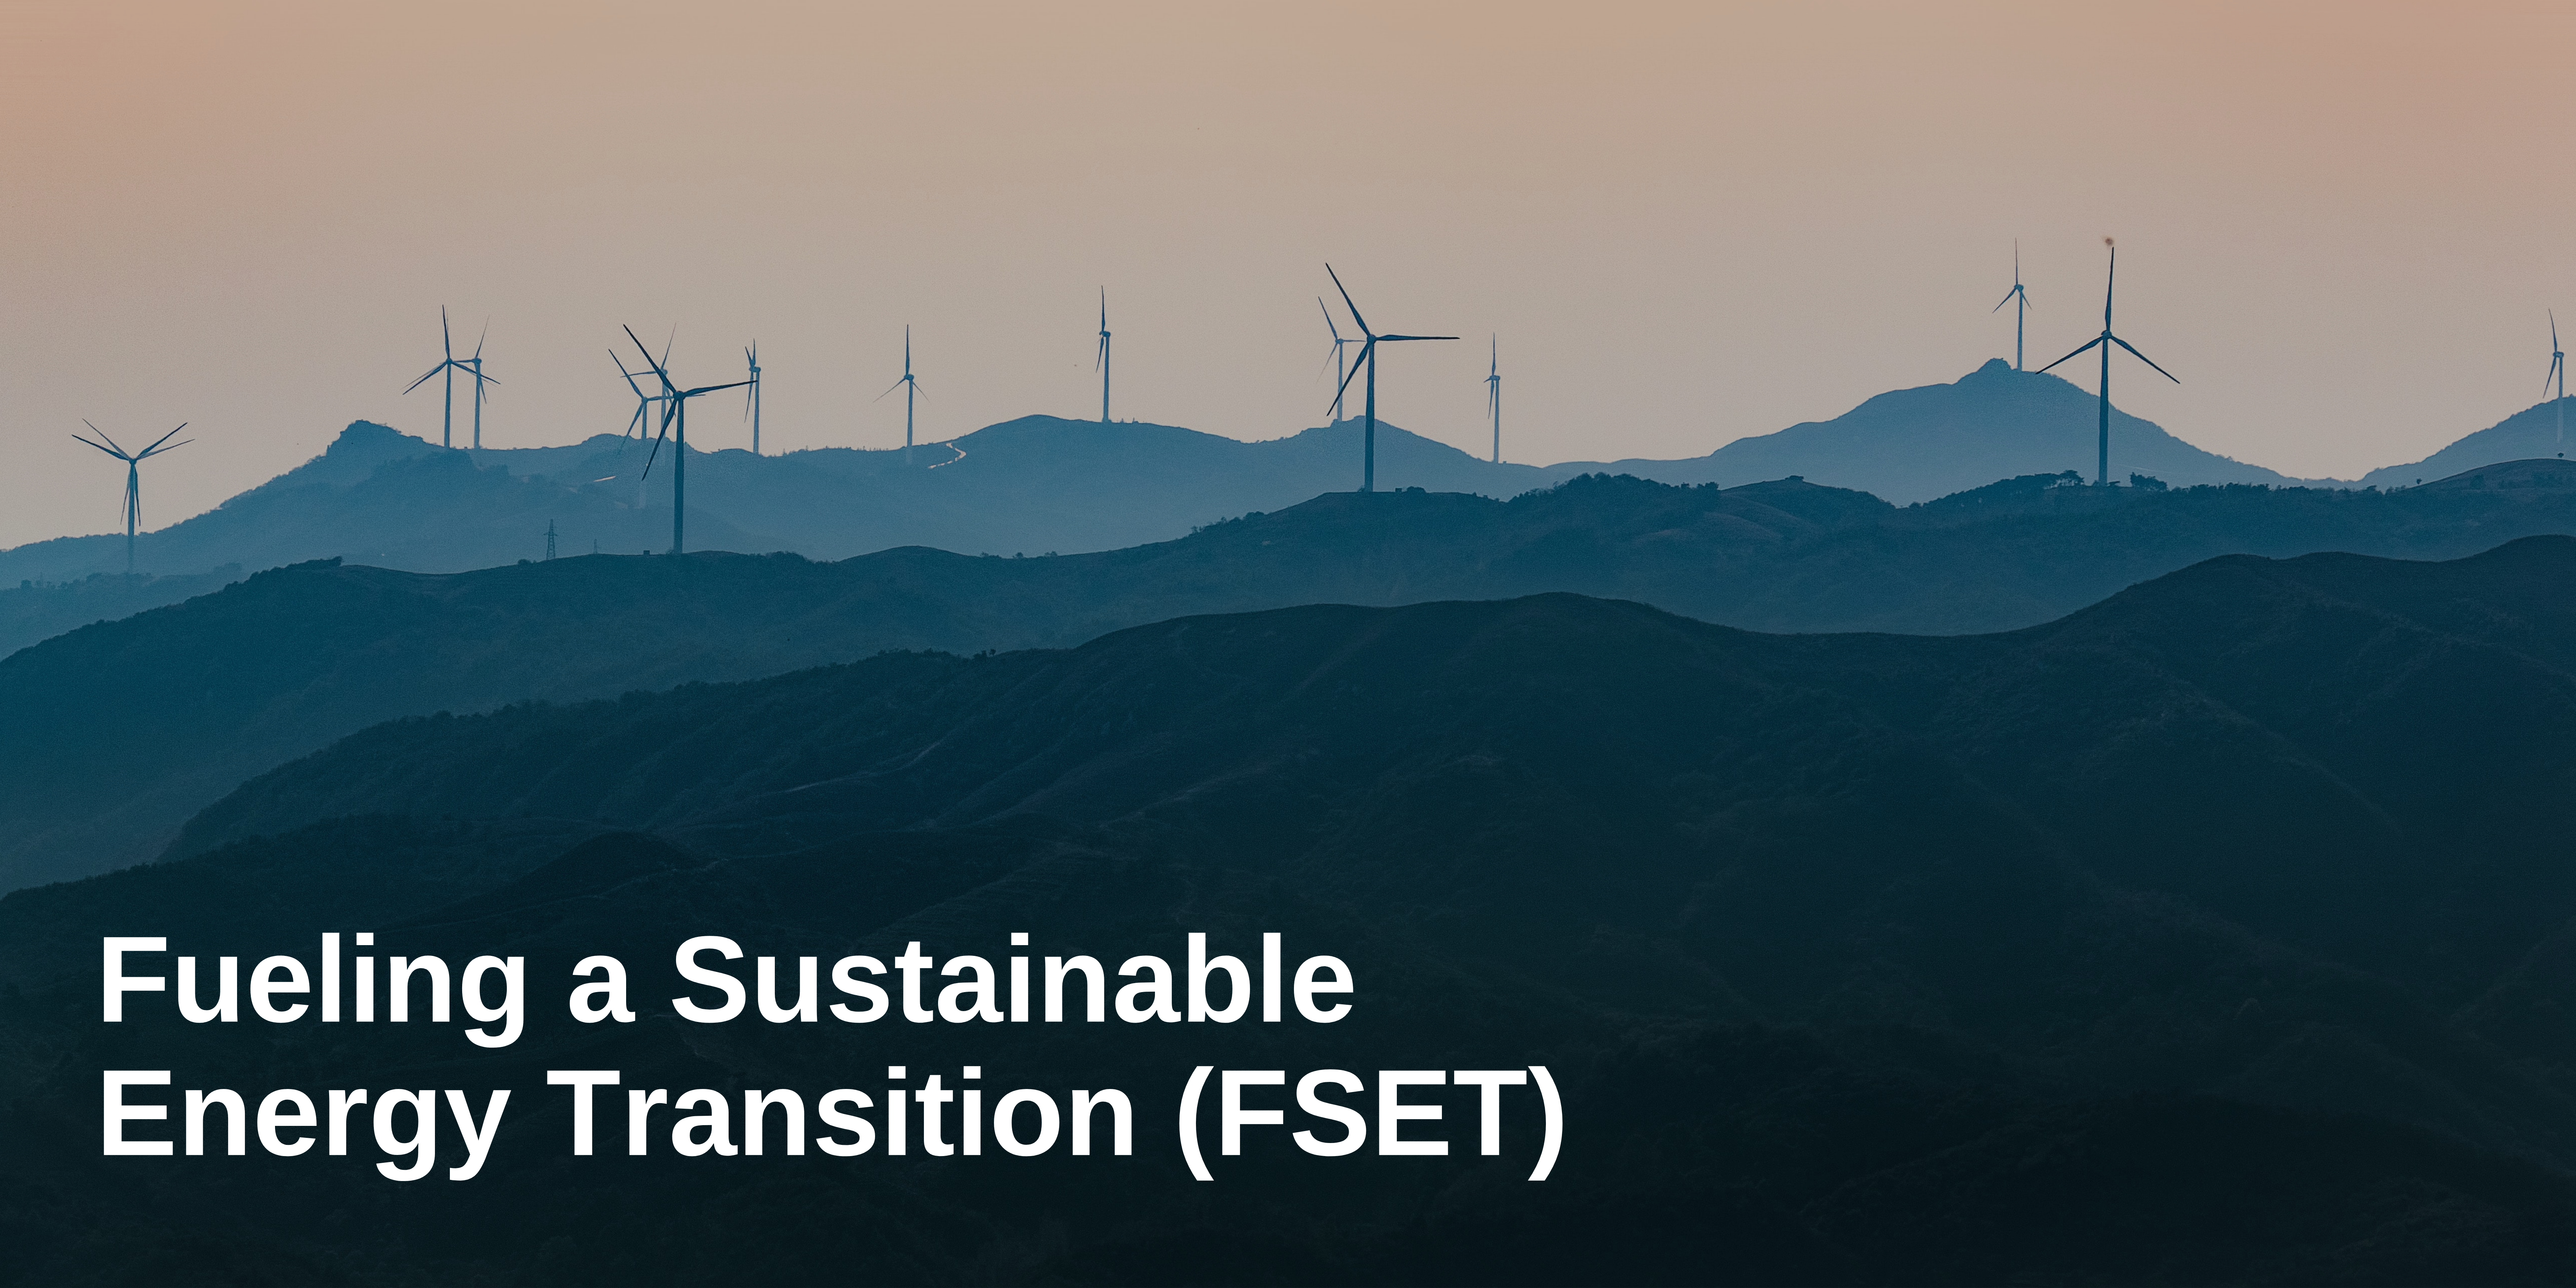 Fueling a Sustainable Energy Transition (FSET)